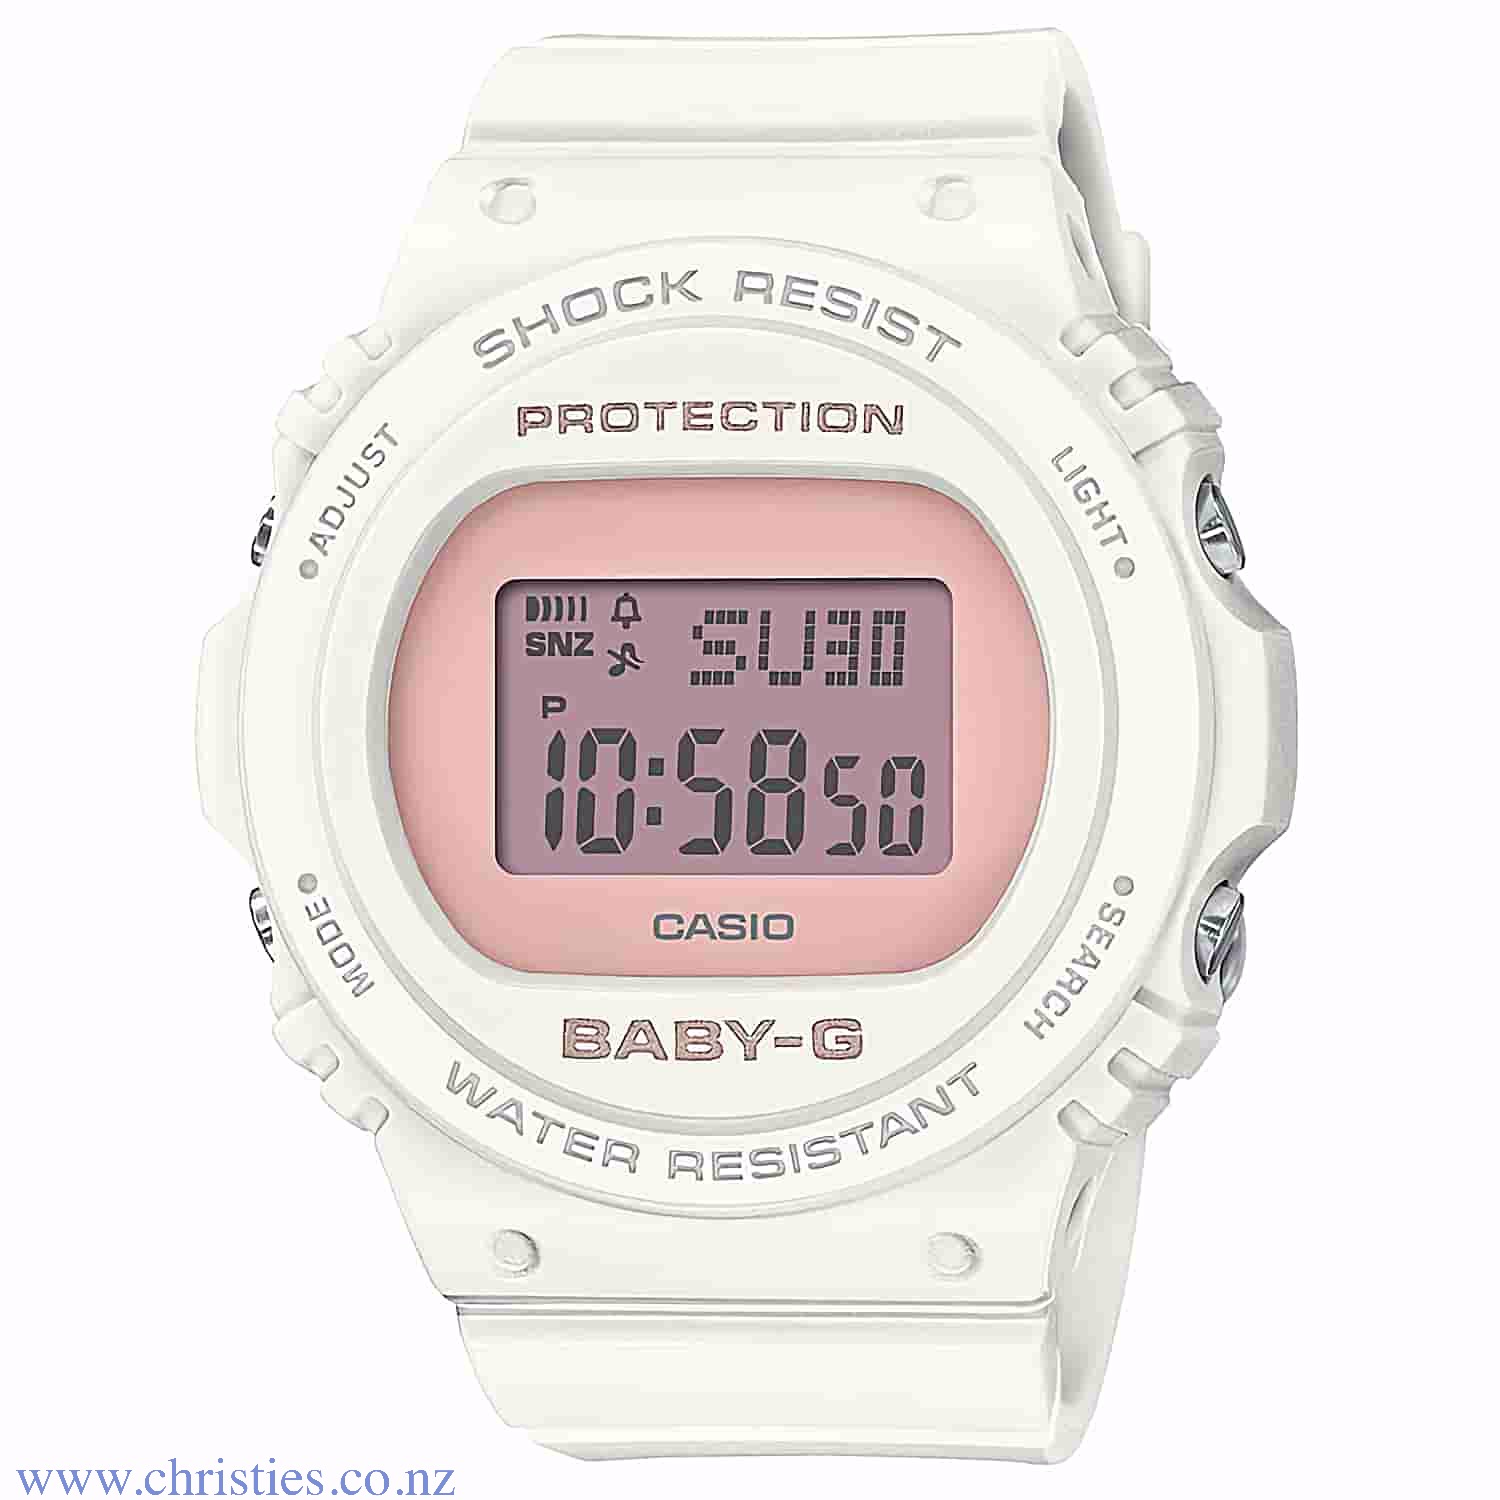 BGD570-7B Casio BABY-G  Watch. This model provides a cool white colour with pink beige accents for exciting new designs. The base model is the popular round face BGD-570. Functions include 200-metre water resistance and shock-resistant structure, maki @ch